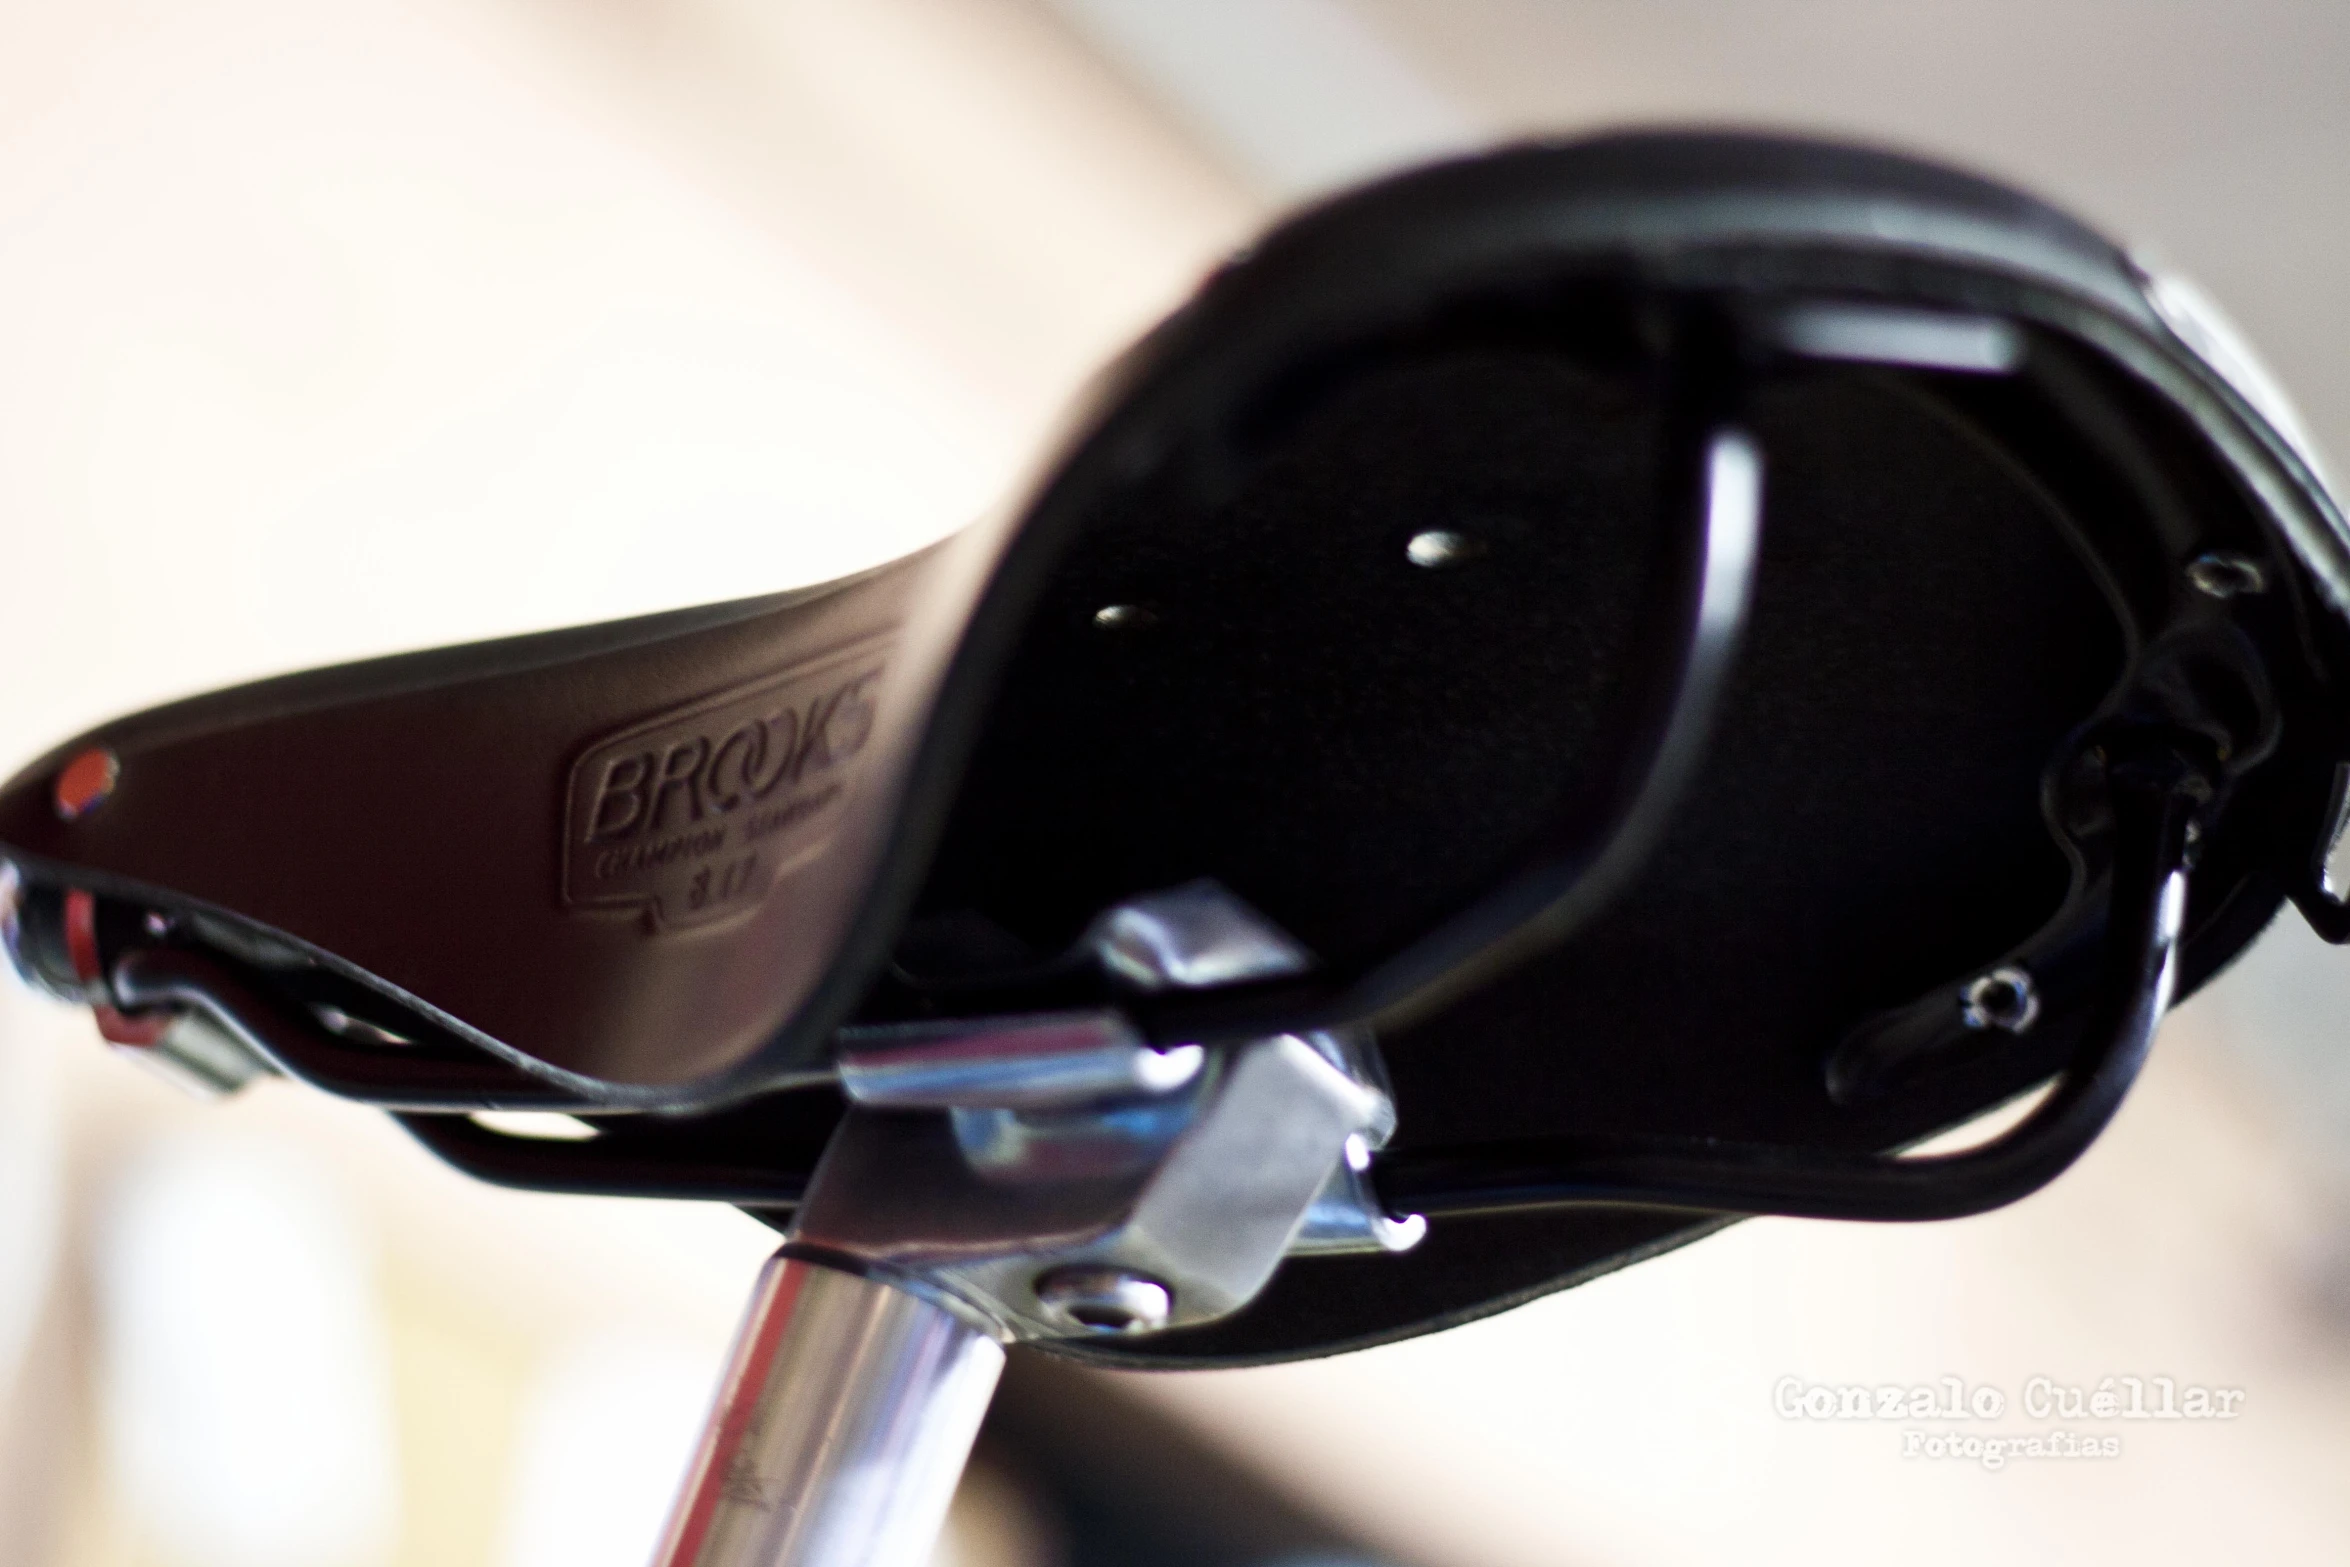 the handlebars of a bicycle with a black leather case